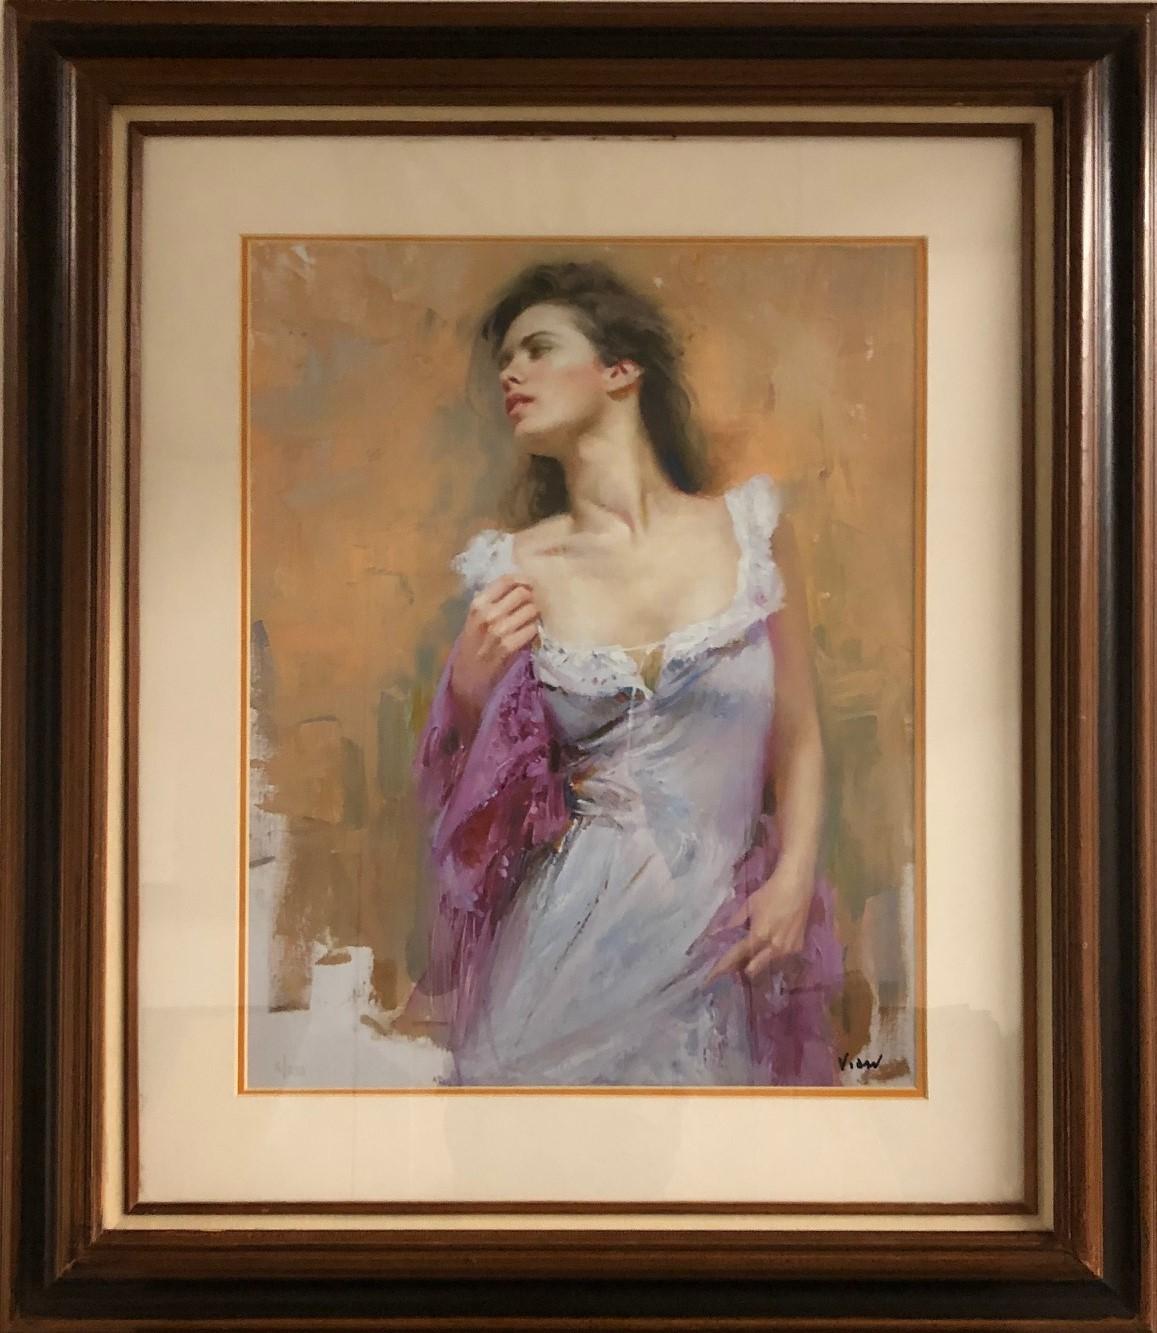 Vidan Portrait Print - Portrait of a Woman-Framed Limited Edition Lithograph, Signed by Artist